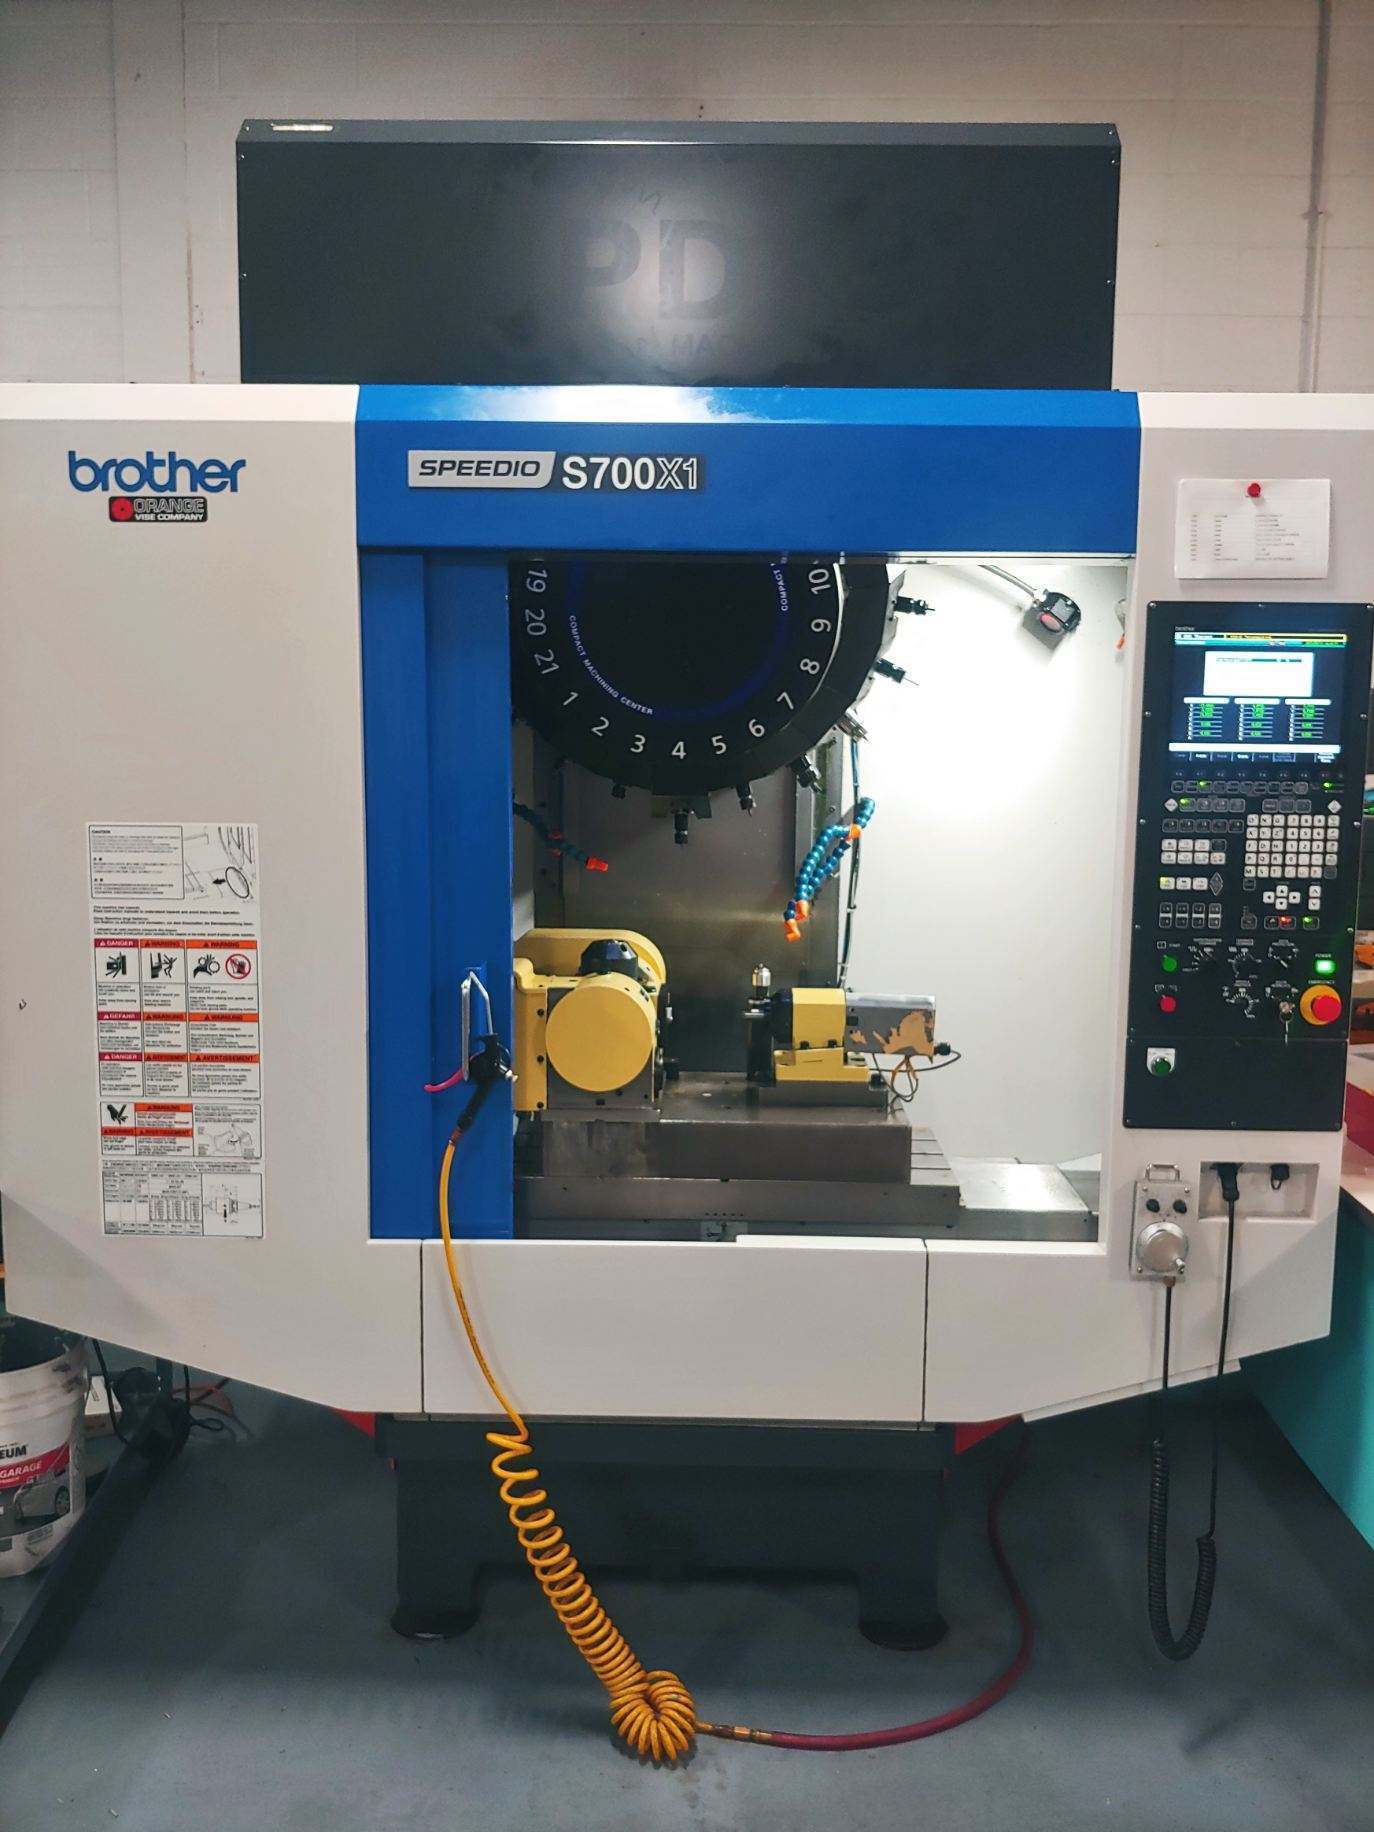 2017 BROTHER SPEEDIO S700X1 Vertical Machining Centers (5-Axis or More) | 520 Machinery Sales LLC